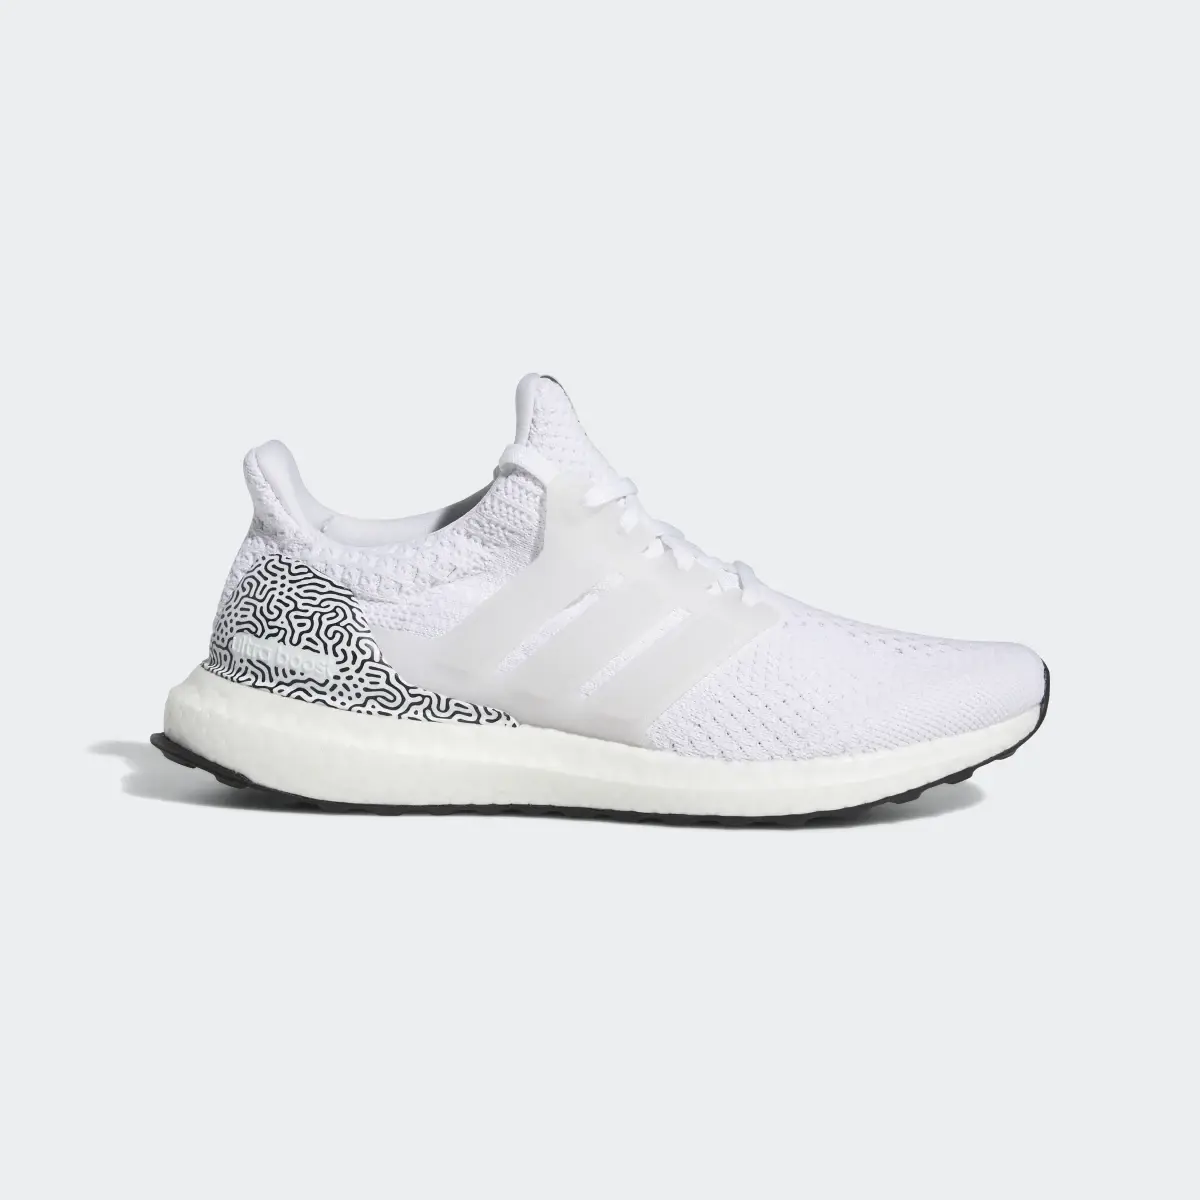 Adidas ULTRABOOST DNA SHOES. 2